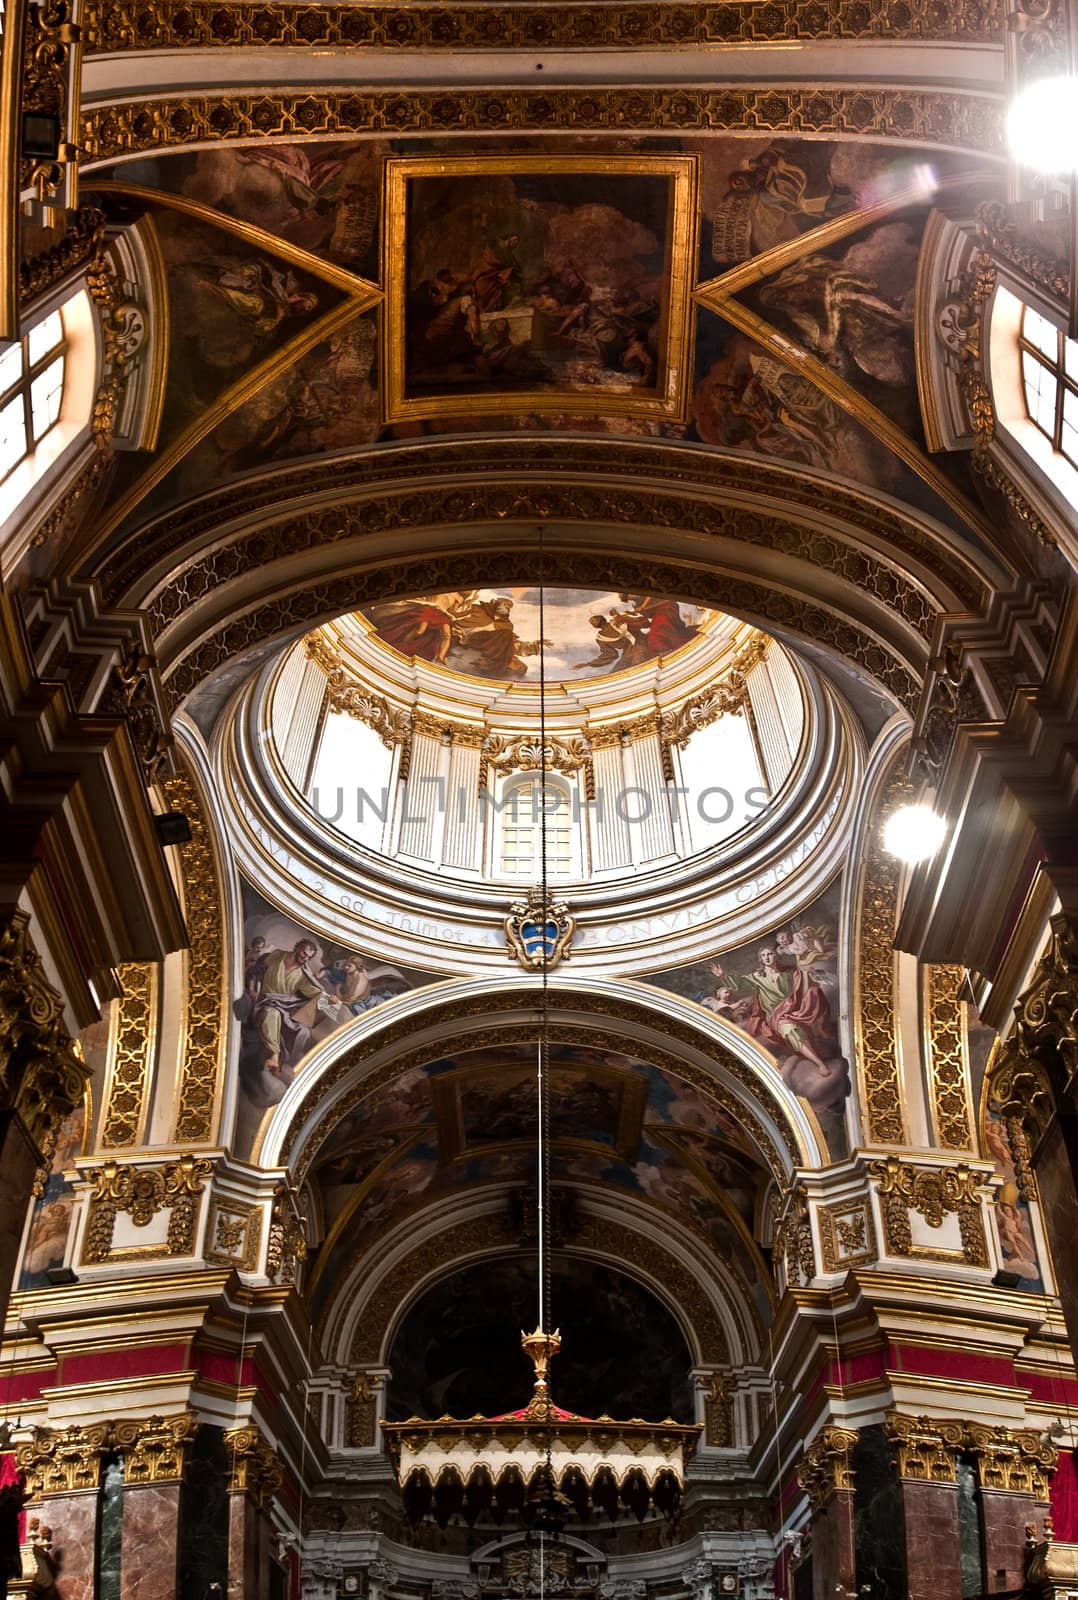 The majestic and beautiful interior of the Cathedral of St. Paul in Mdina in Malta